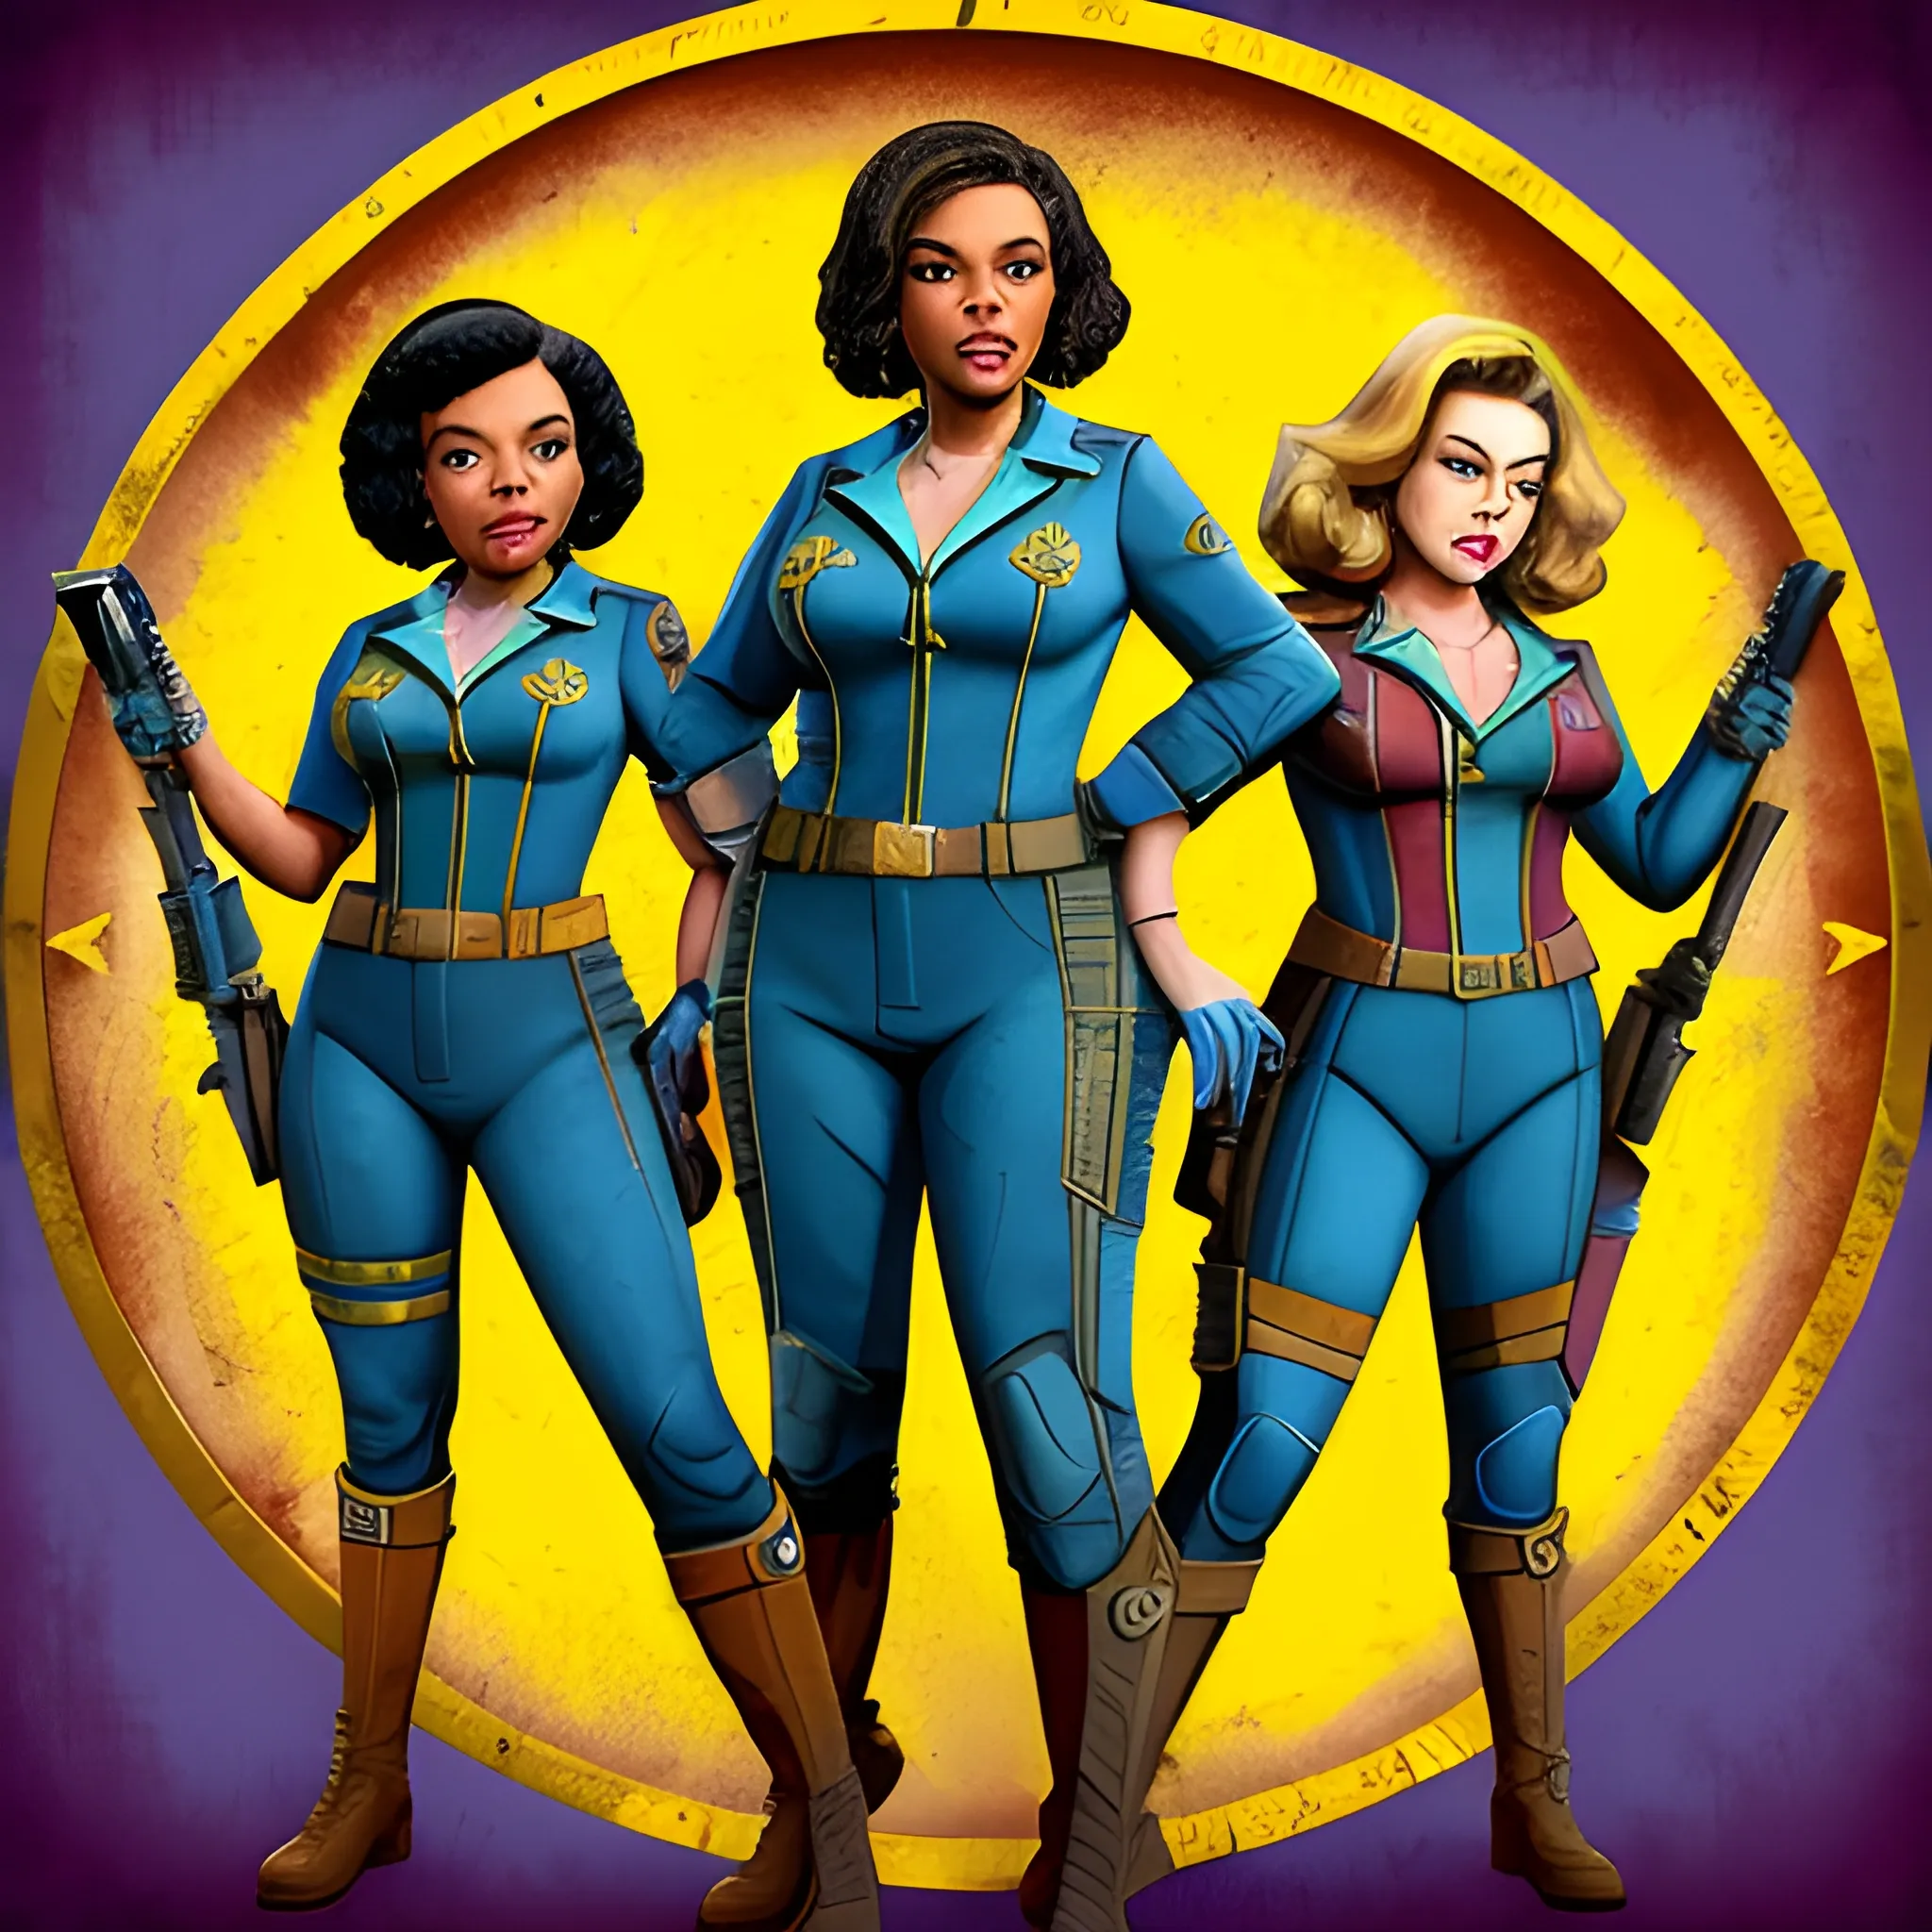 In the style of Fallout New Vegas, masterpiece, Yvette Nicole Brown and Allison Brie and and Gillian Jacobs as vault dwellers in blue vault suits